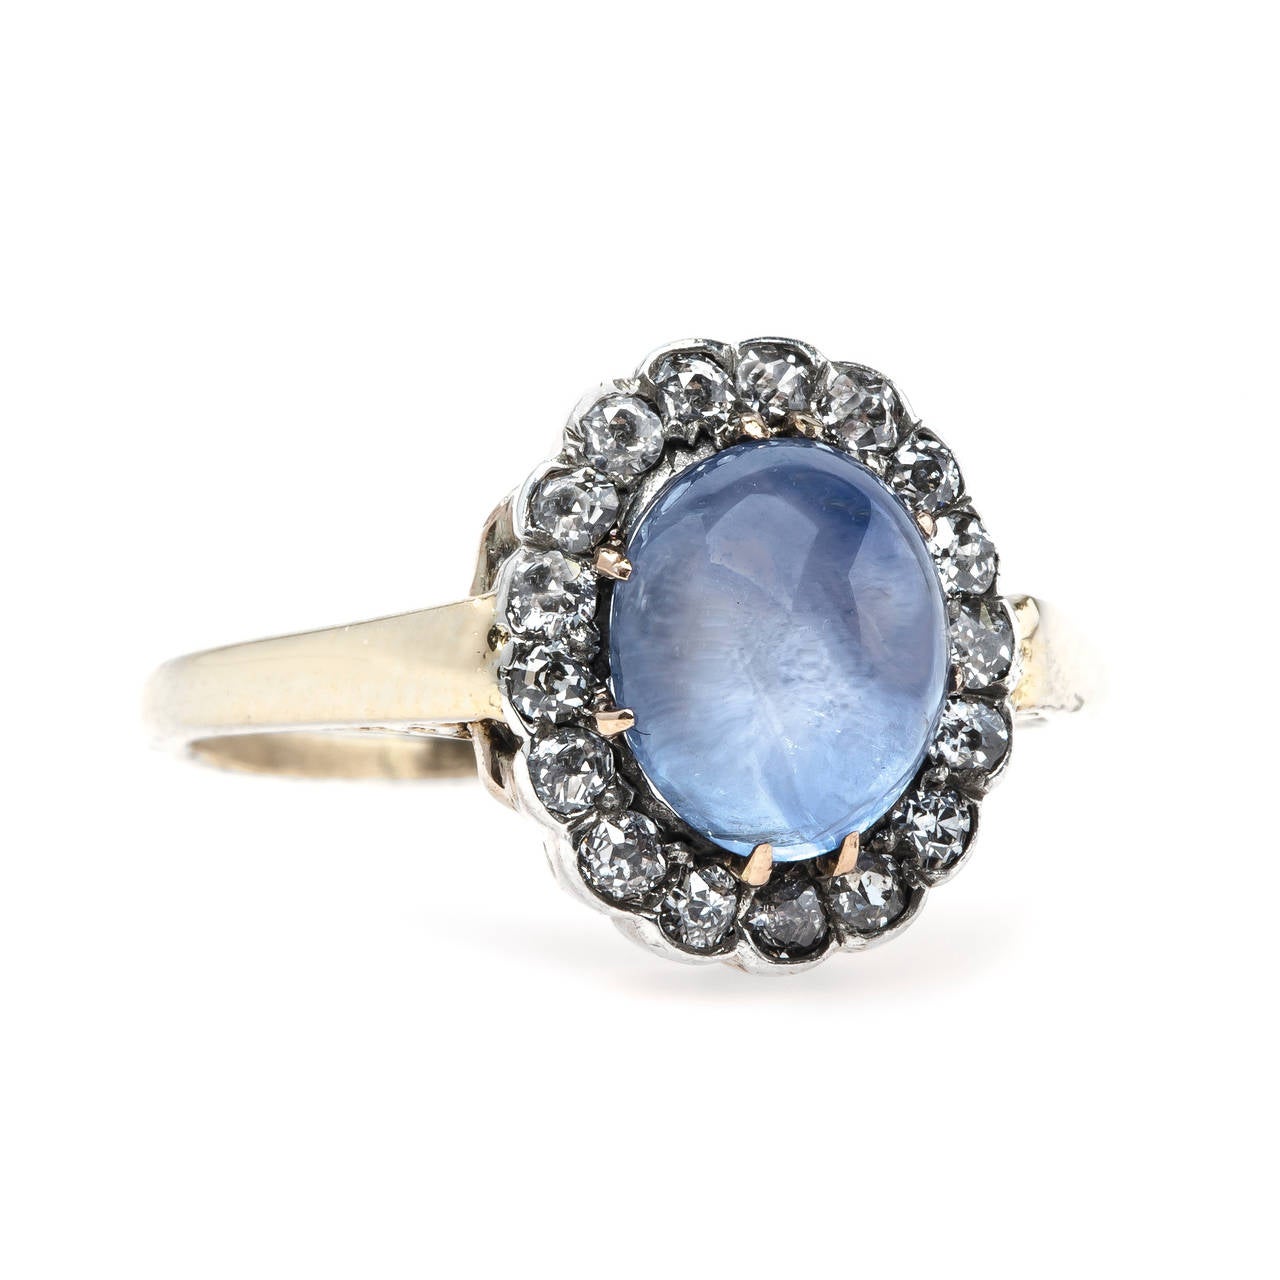 Victorian Dreamy Oval Cabochon Sapphire Engagement Ring with Diamond Halo